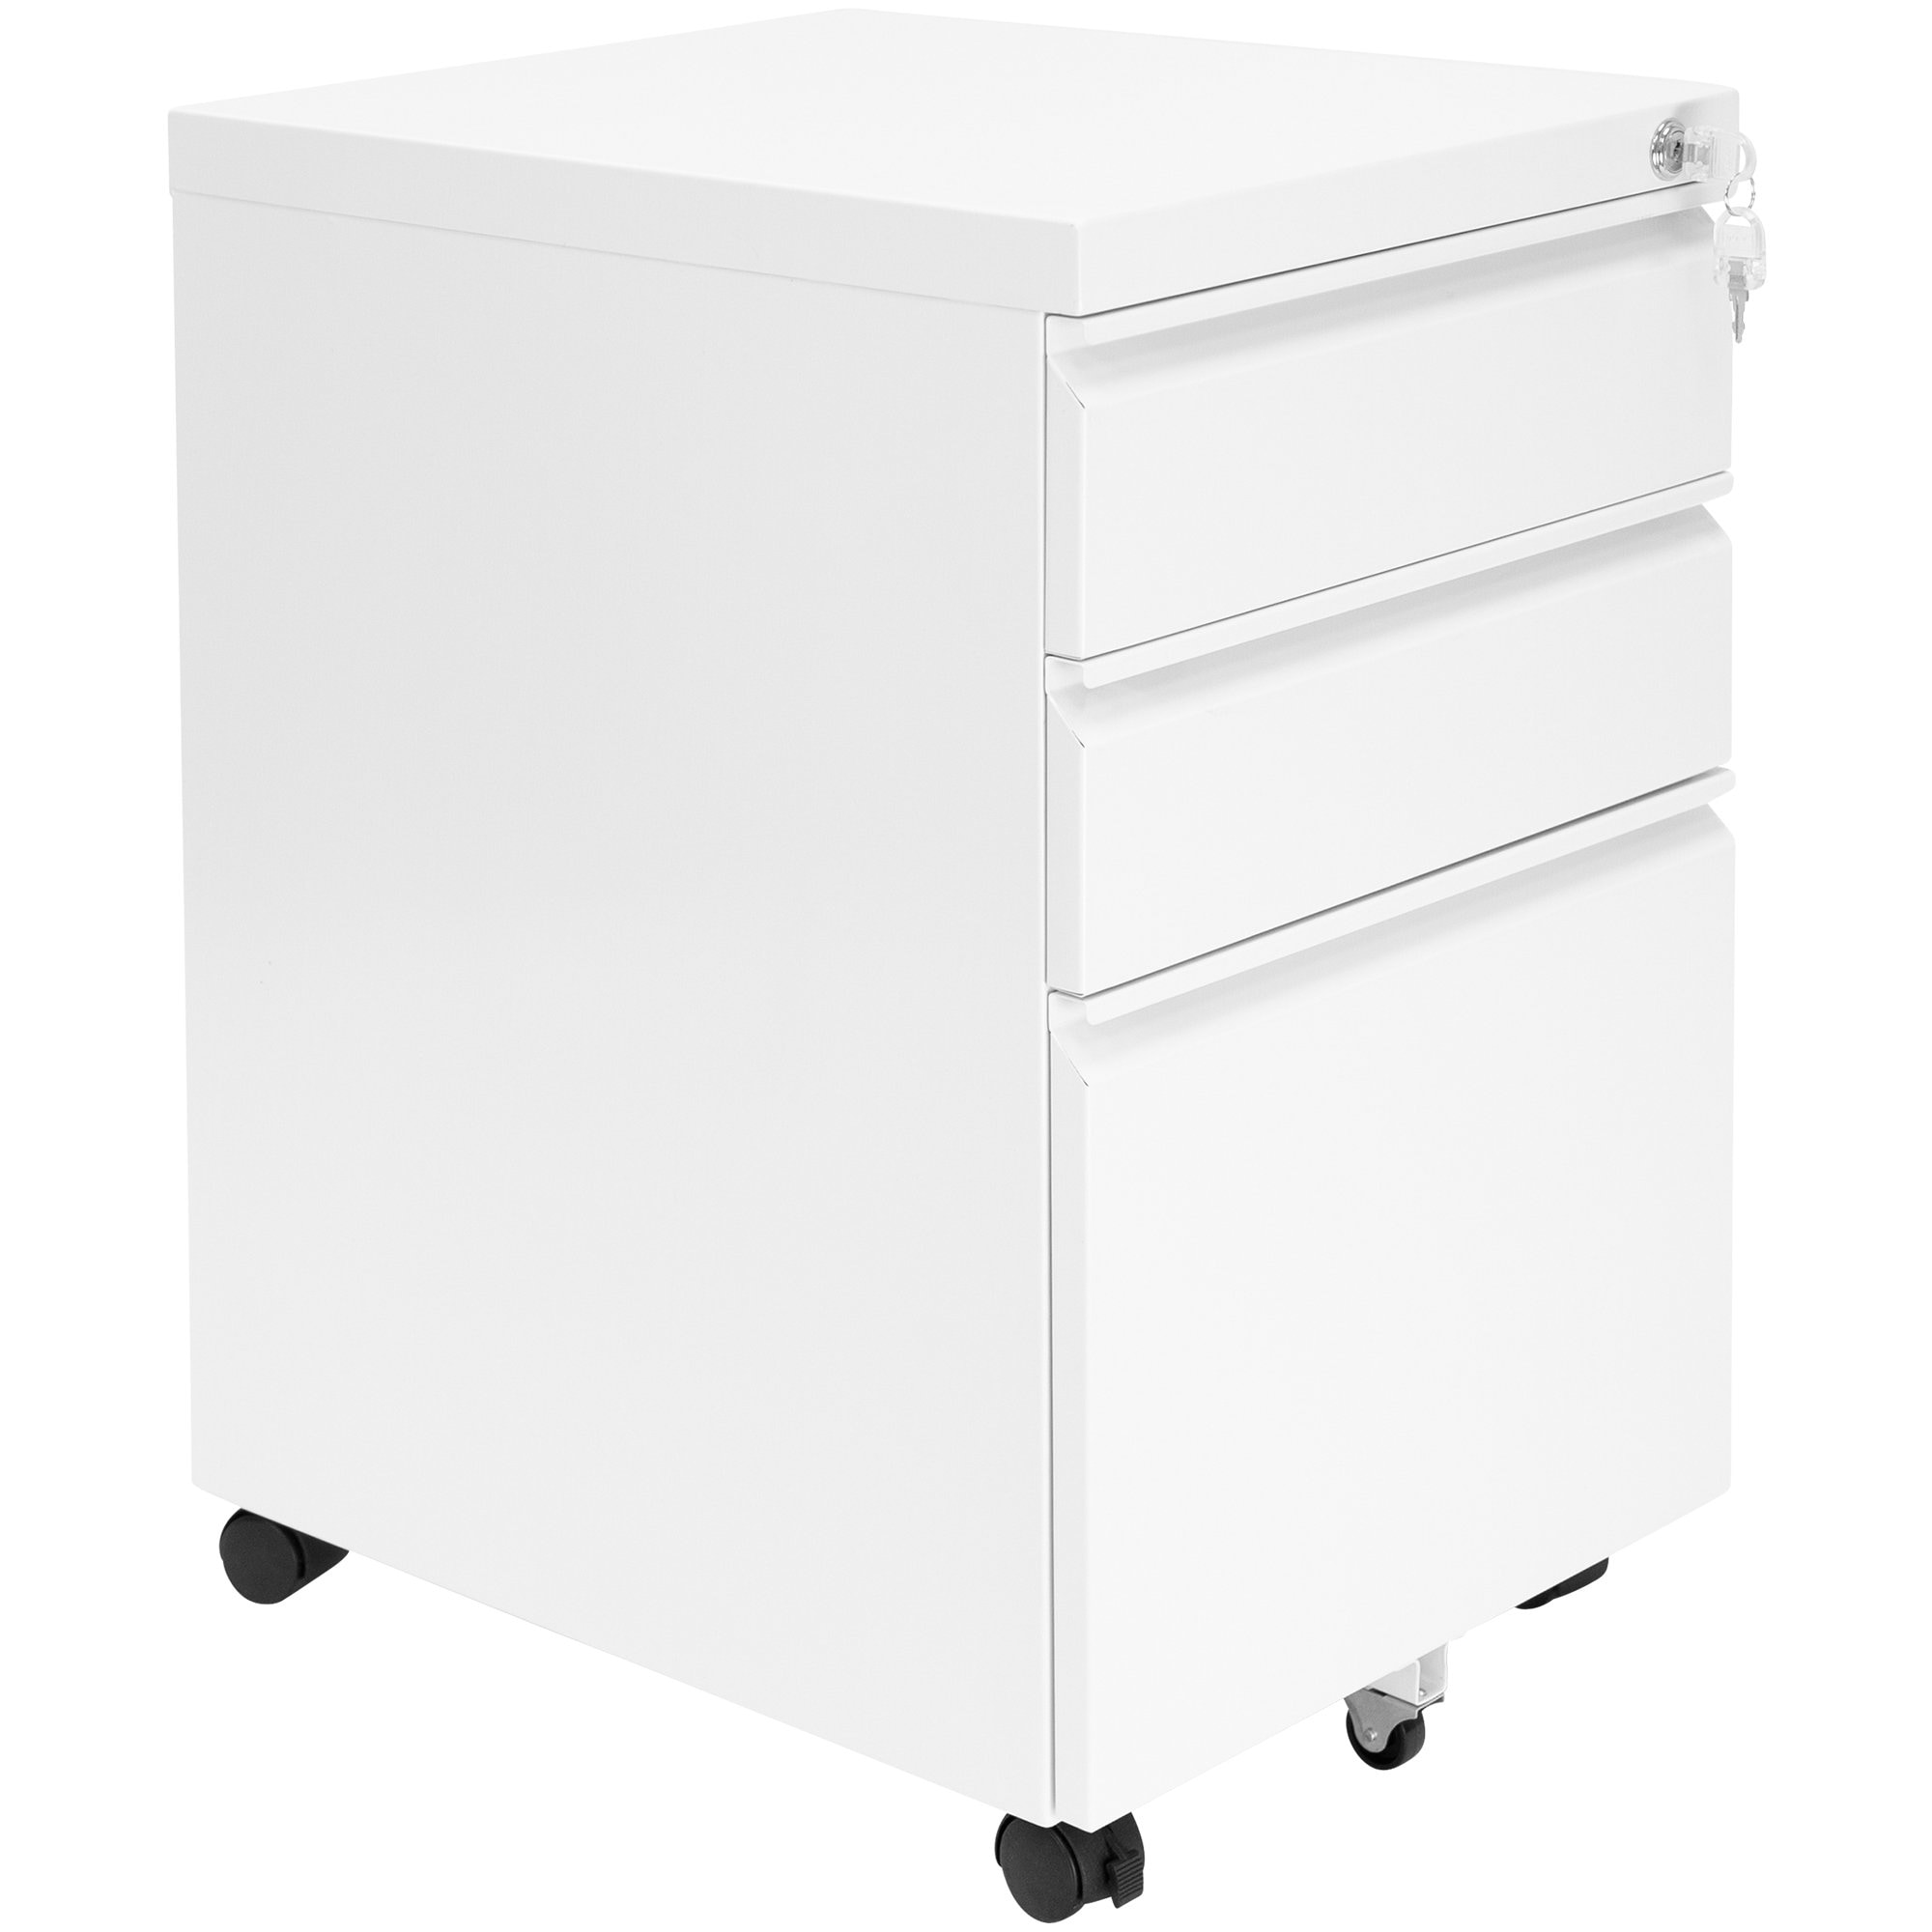 https://ak1.ostkcdn.com/images/products/is/images/direct/6b15b34d7874a0afbc17d36b379f911743dffdba/Mount-It%21-3-Drawer-Cabinet-for-Under-Desk-with-Wheels-%7C-Rolling-Storage-with-Lock.jpg